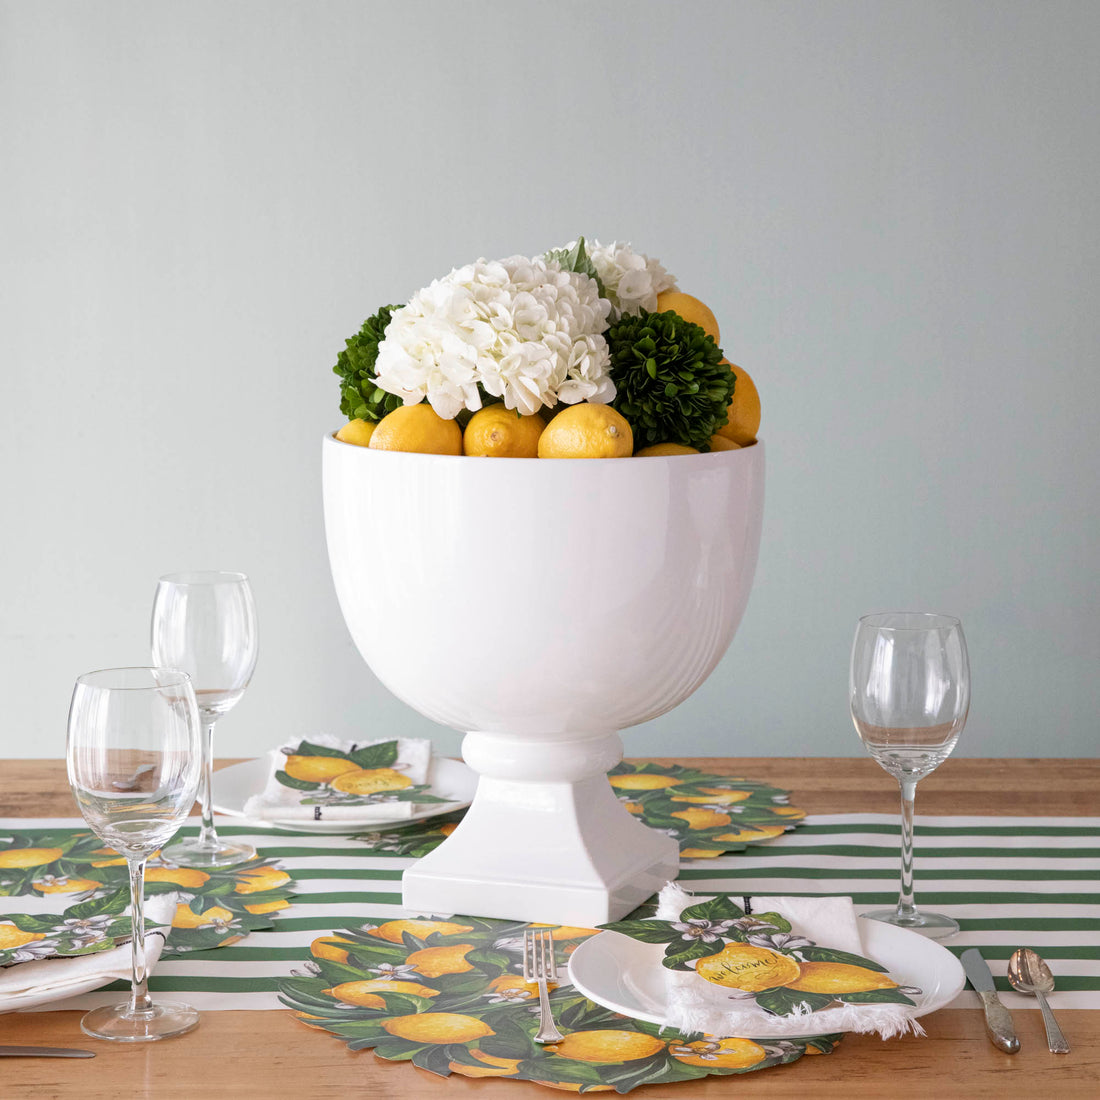 White European ceramic Pedestal Bowls from Park Hill, decorative centerpiece on pedestals, one filled with lemons and flowers, on a striped surface with wooden board.